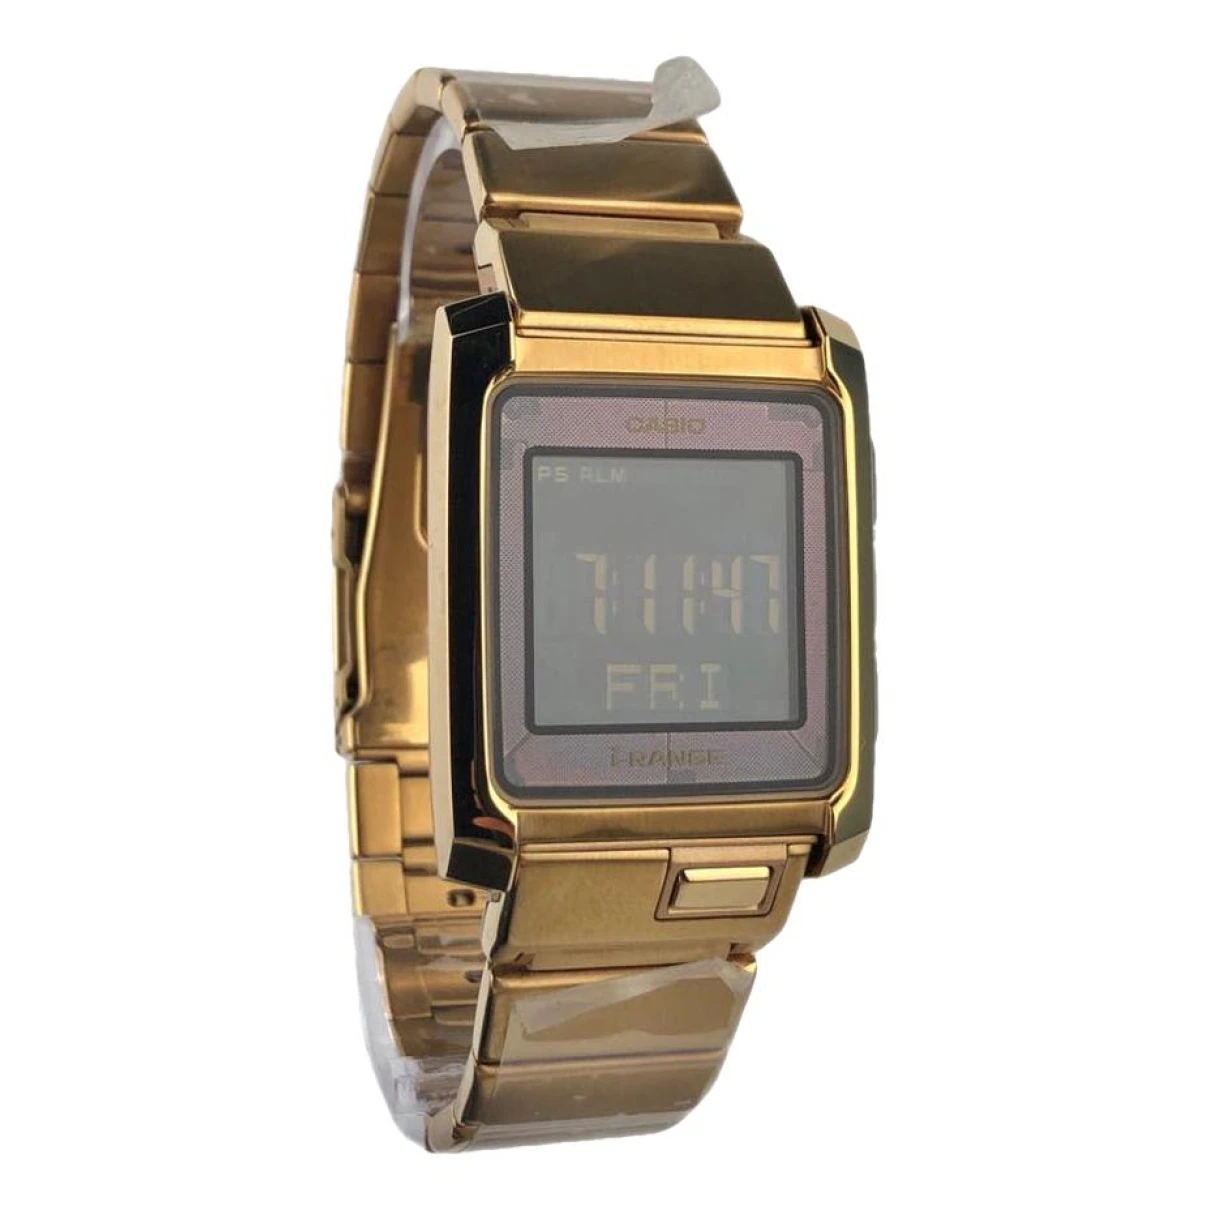 Pre-owned Casio Watch In Gold